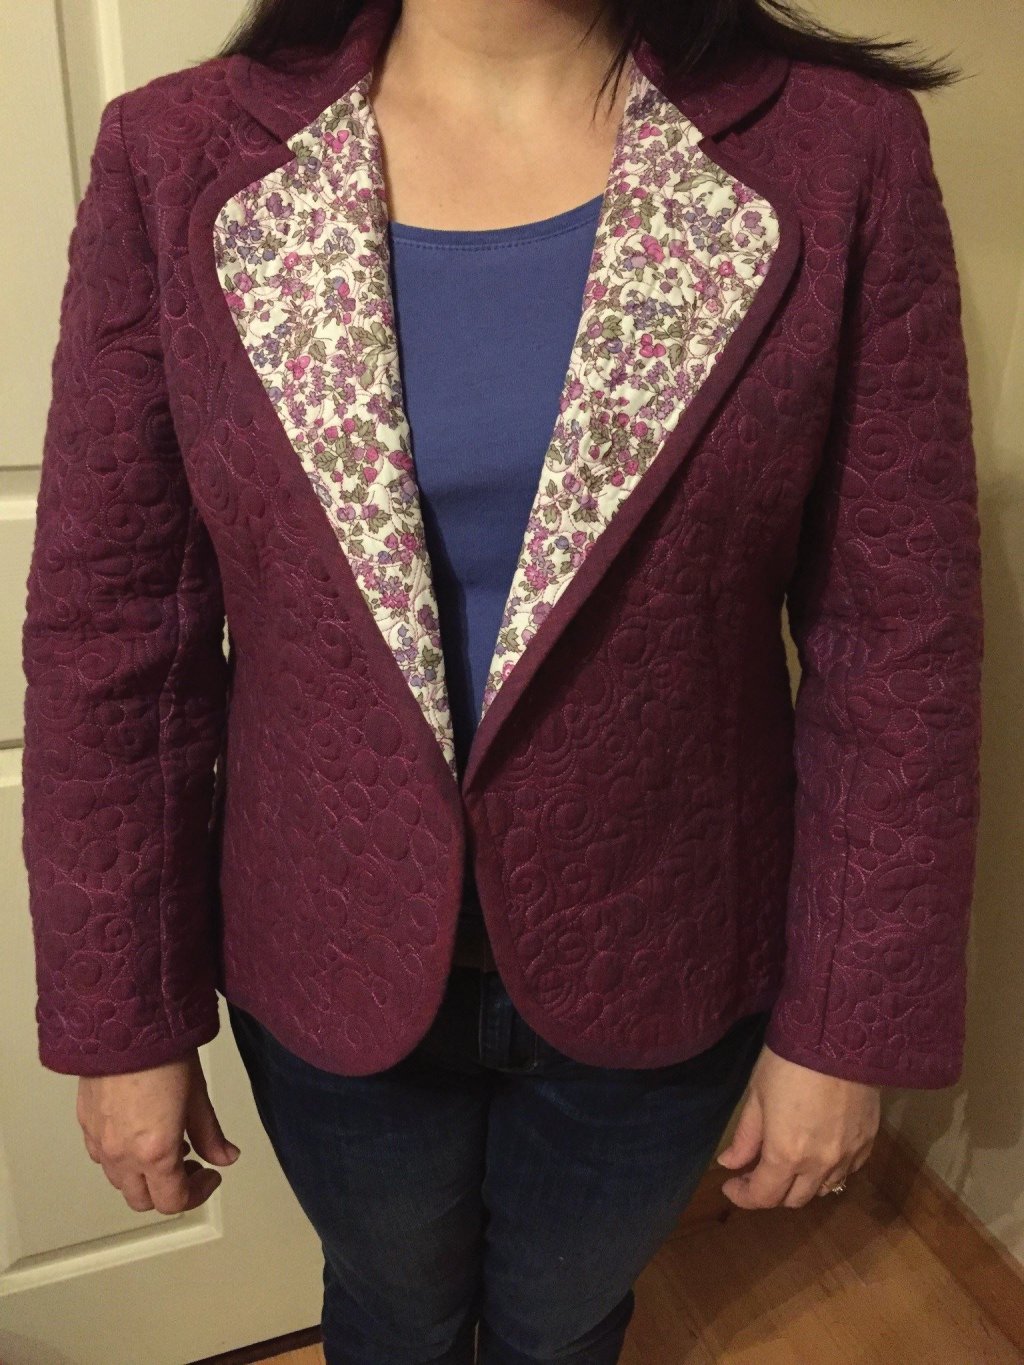 The finished jacket fits fairly well, I still need to insert shoulder pads and decide on a button fastening, but I love the result.  My family joke that they won't be seen anywhere with me wearing it but I'll try and ignore them!